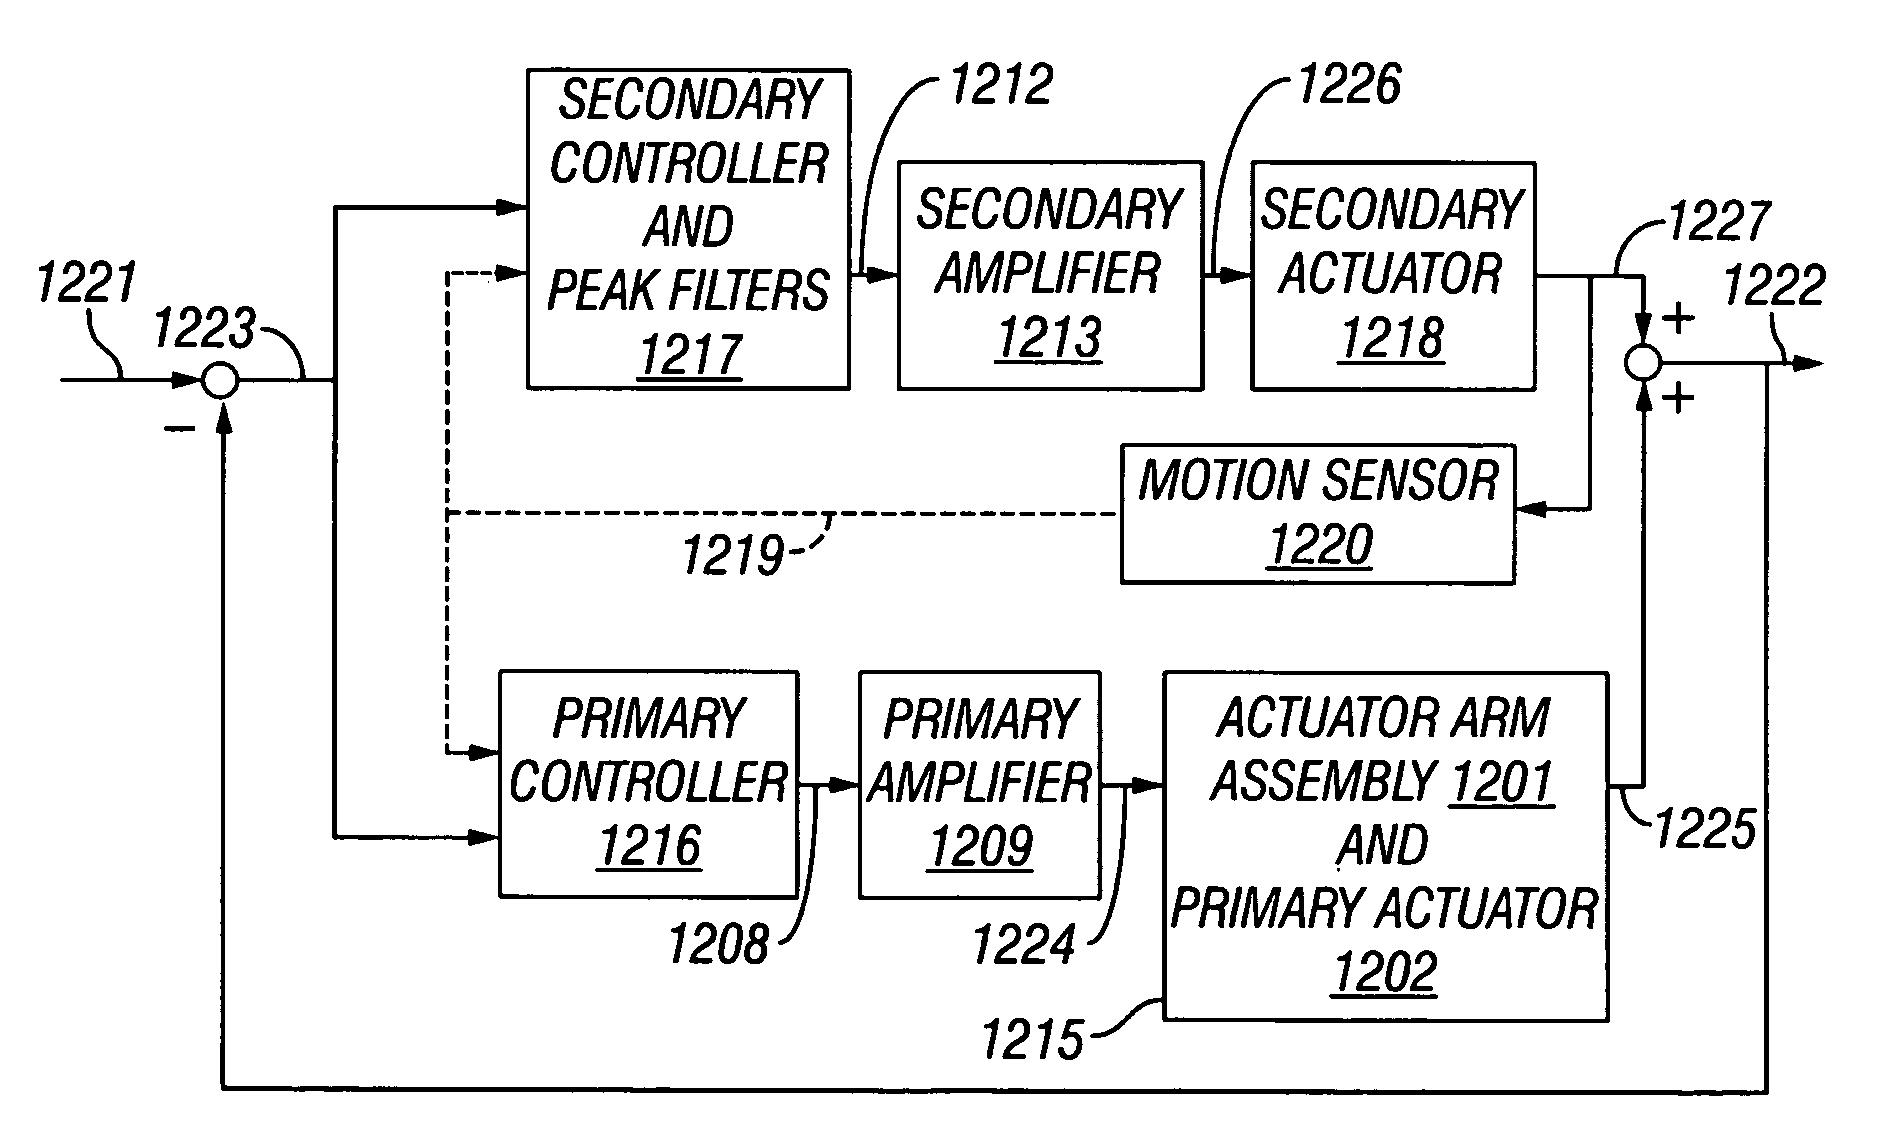 Technique to compensate for resonances and disturbances on primary actuator through use of a secondary actuator